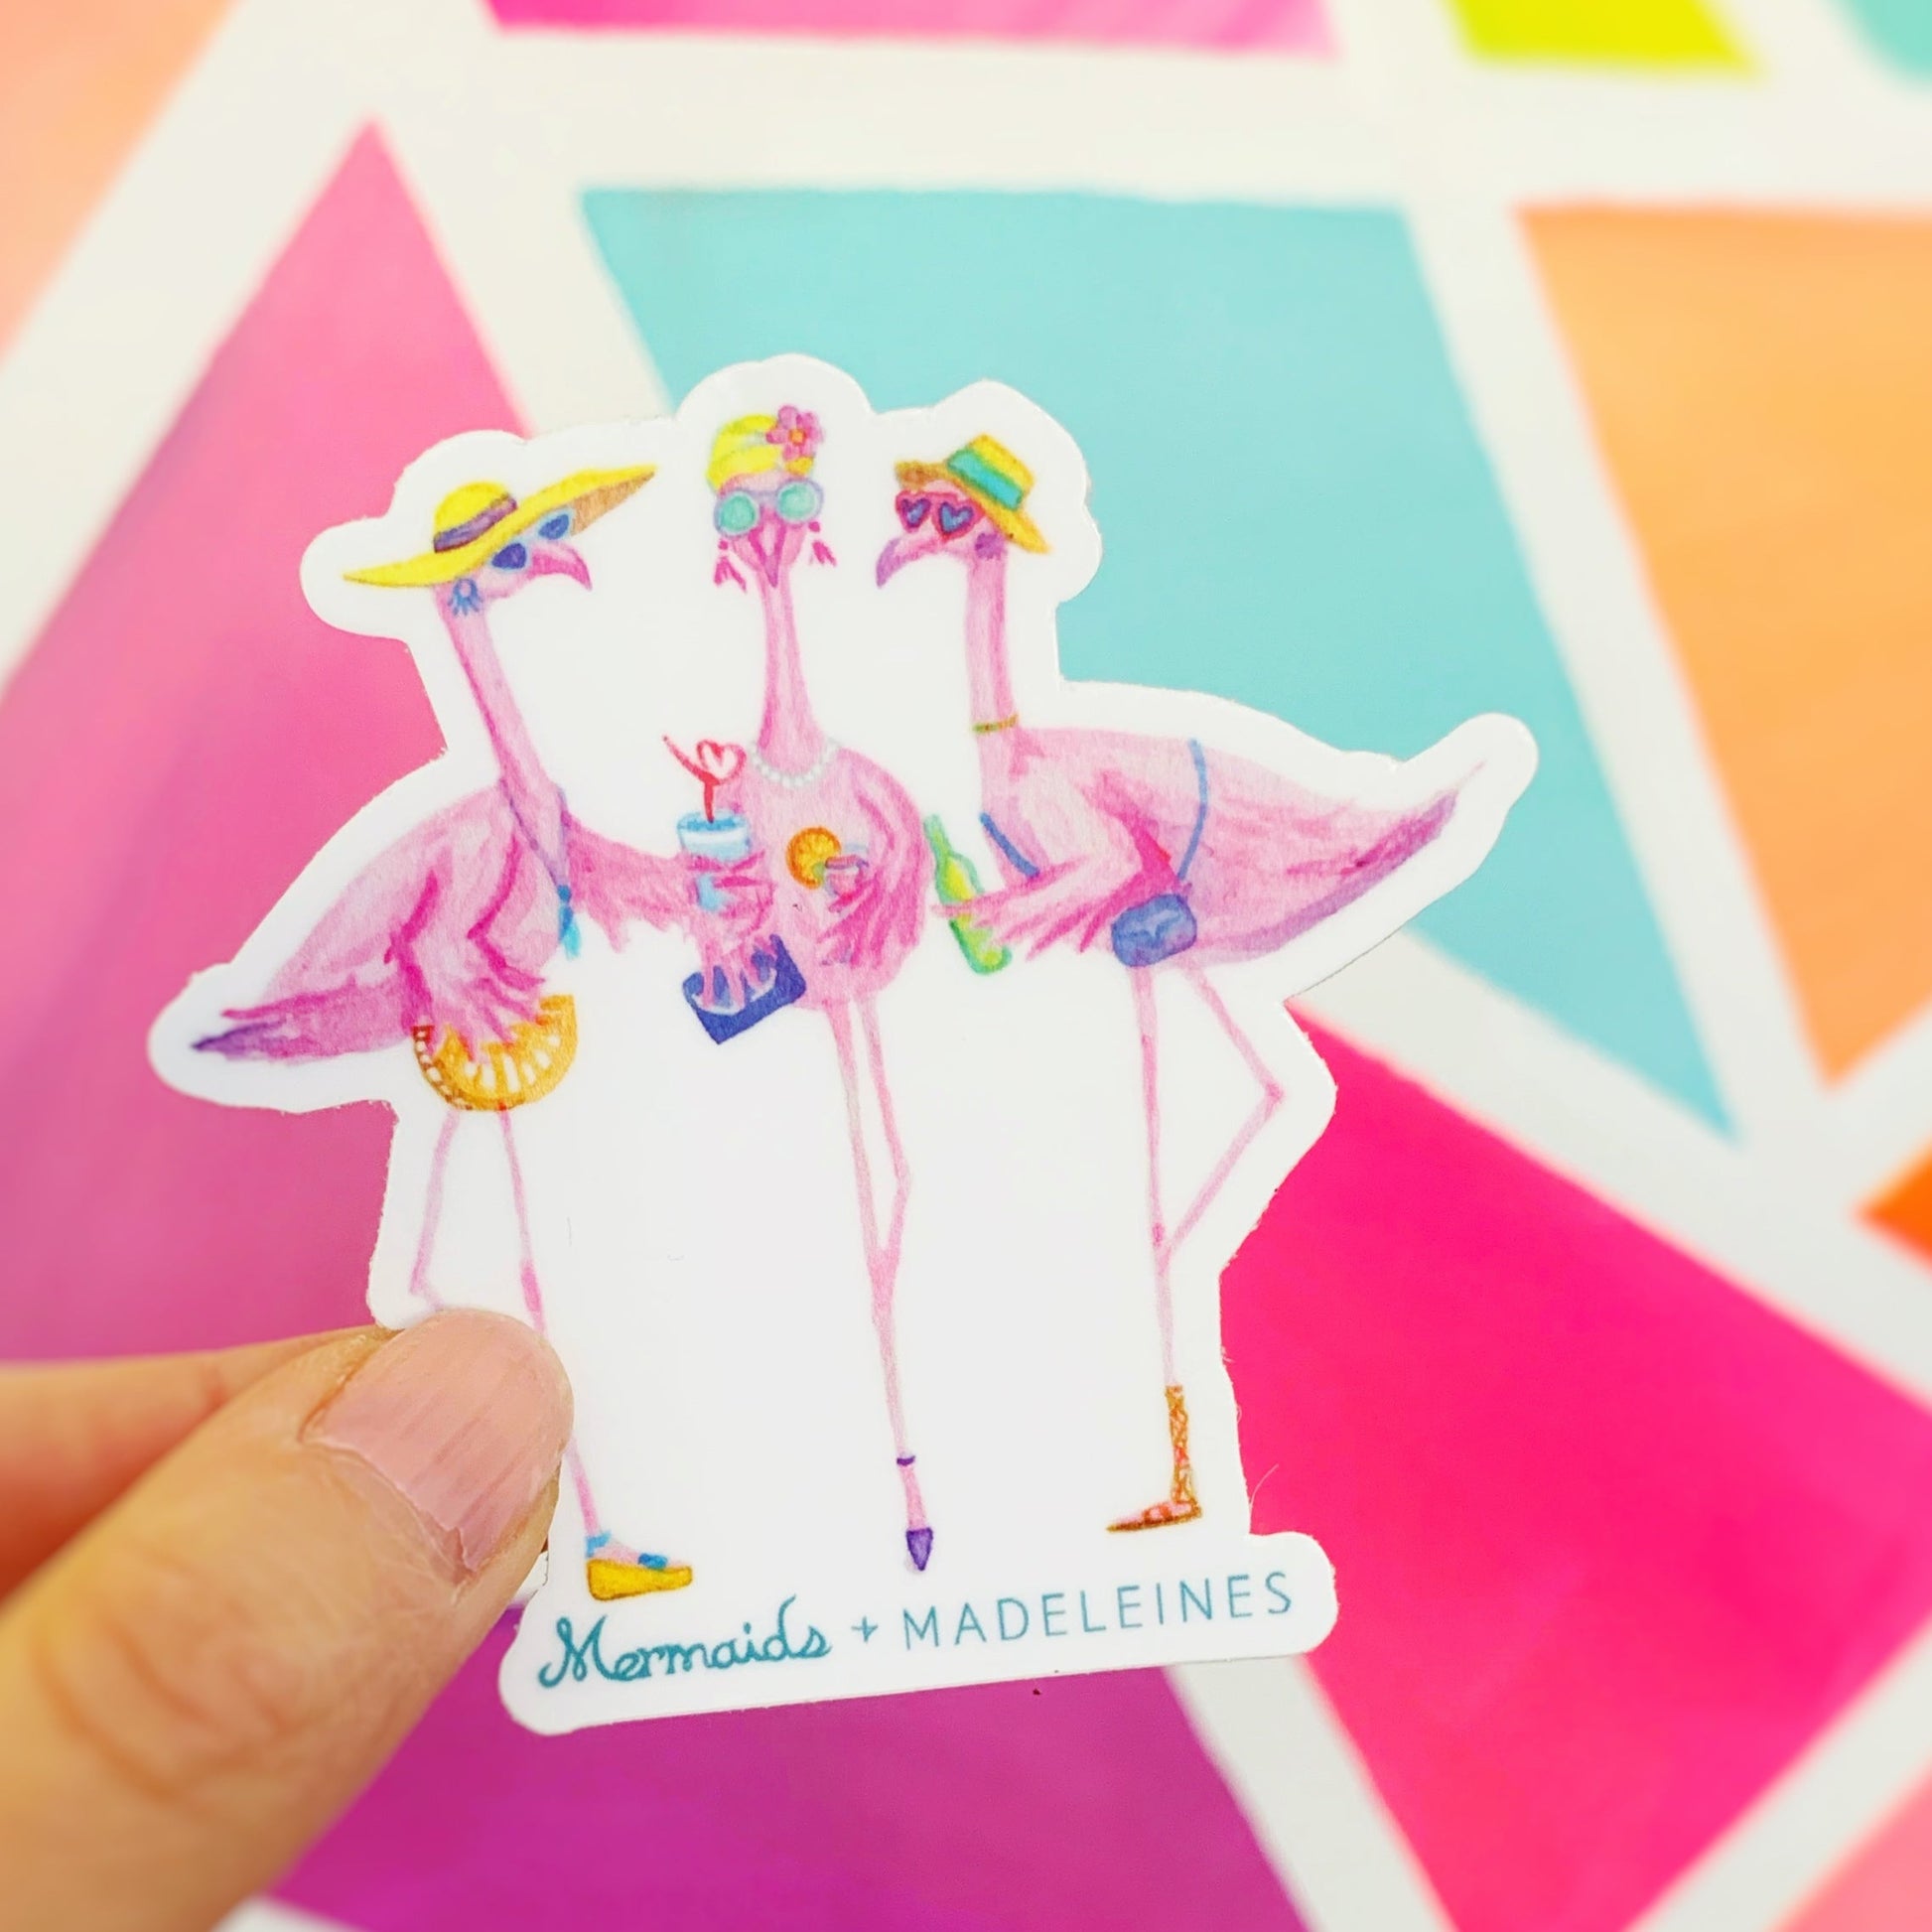 A picture of the Flamingal summer vinyl sticker being held up in front of a bright neon mural. The flamingal sticker is created from original artwork made with acrylic paint and marker its 3 flamingo ladies dressed in summer hats and various footwear